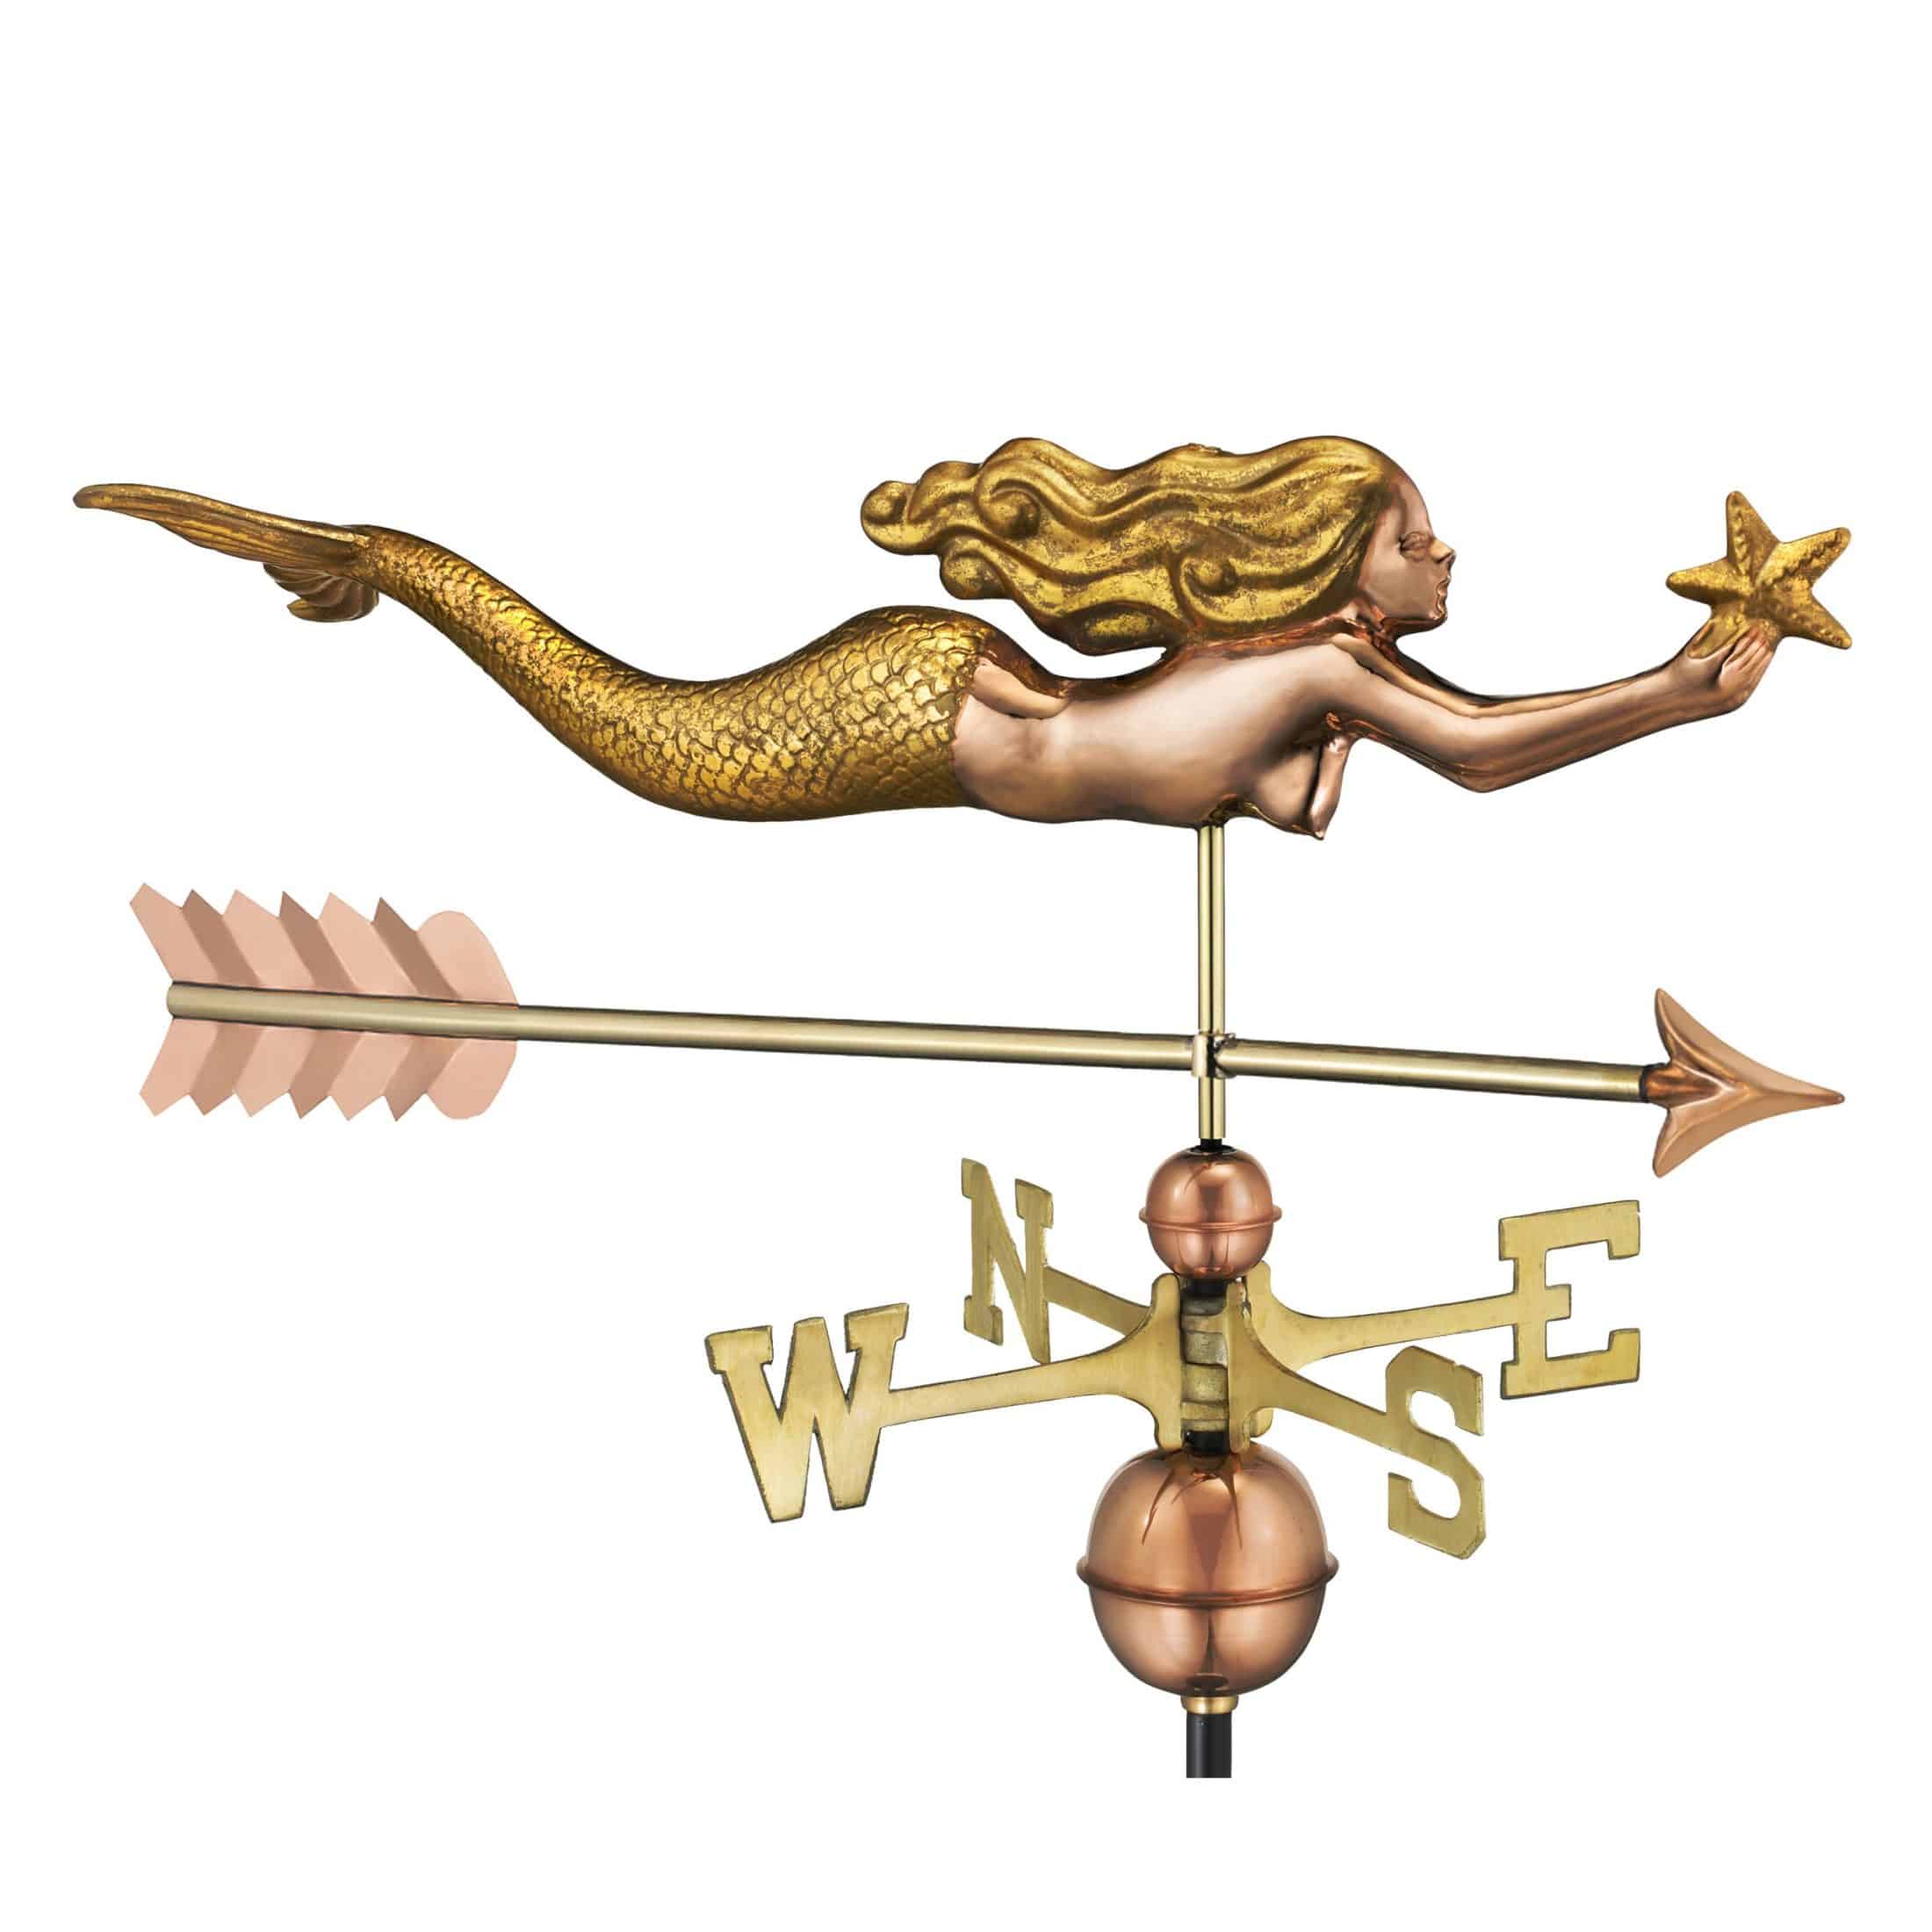 A Mermaid with Star and Arrow polished with Golden Leaf weathervane ideas